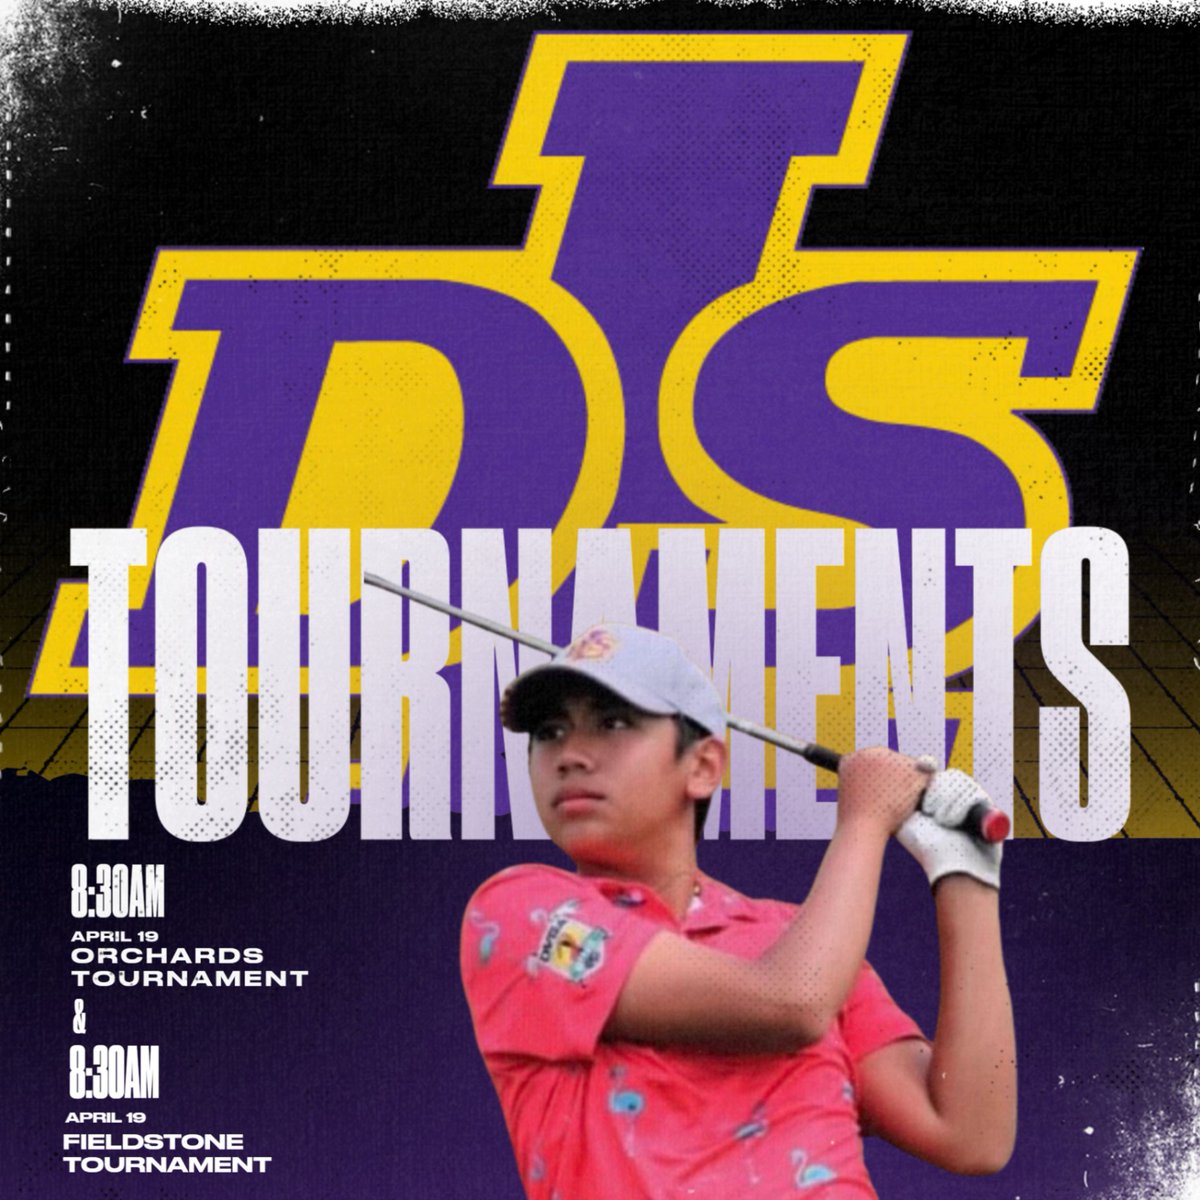 DLS Varsity Golf begins their day early with two tournaments at The Orchards and Fieldstone, both beginning at 8:30AM today, April 19. Let’s go, Pilots!

#PilotPride @DLSPilotsGolf